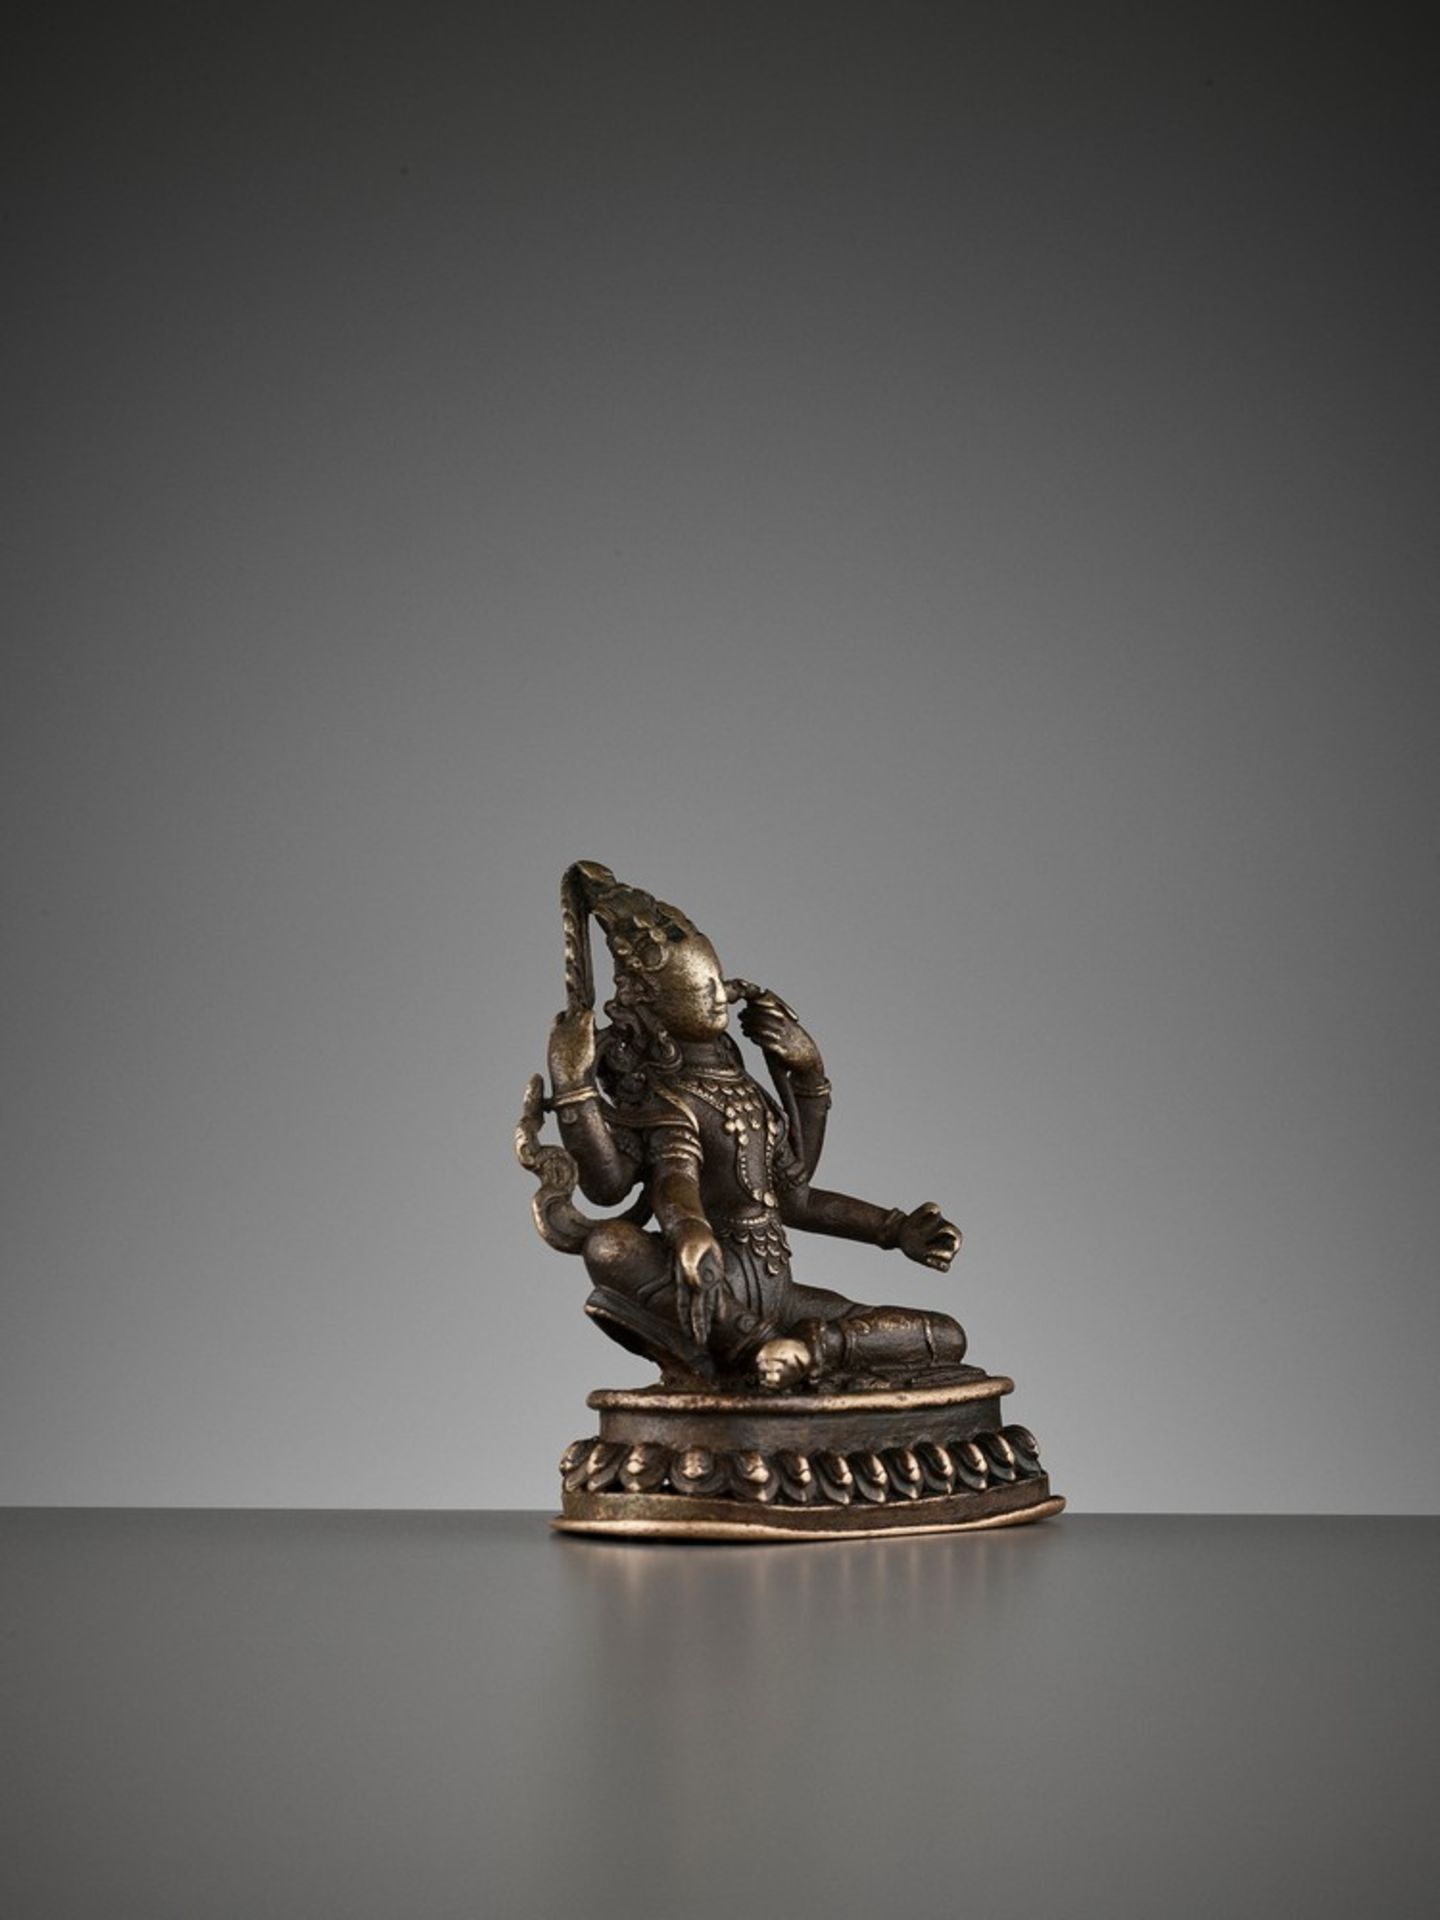 A SMALL BRONZE OF THE FOUR-ARMED AVALOKITESVARA, 15TH-16TH CENTURY - Image 8 of 11